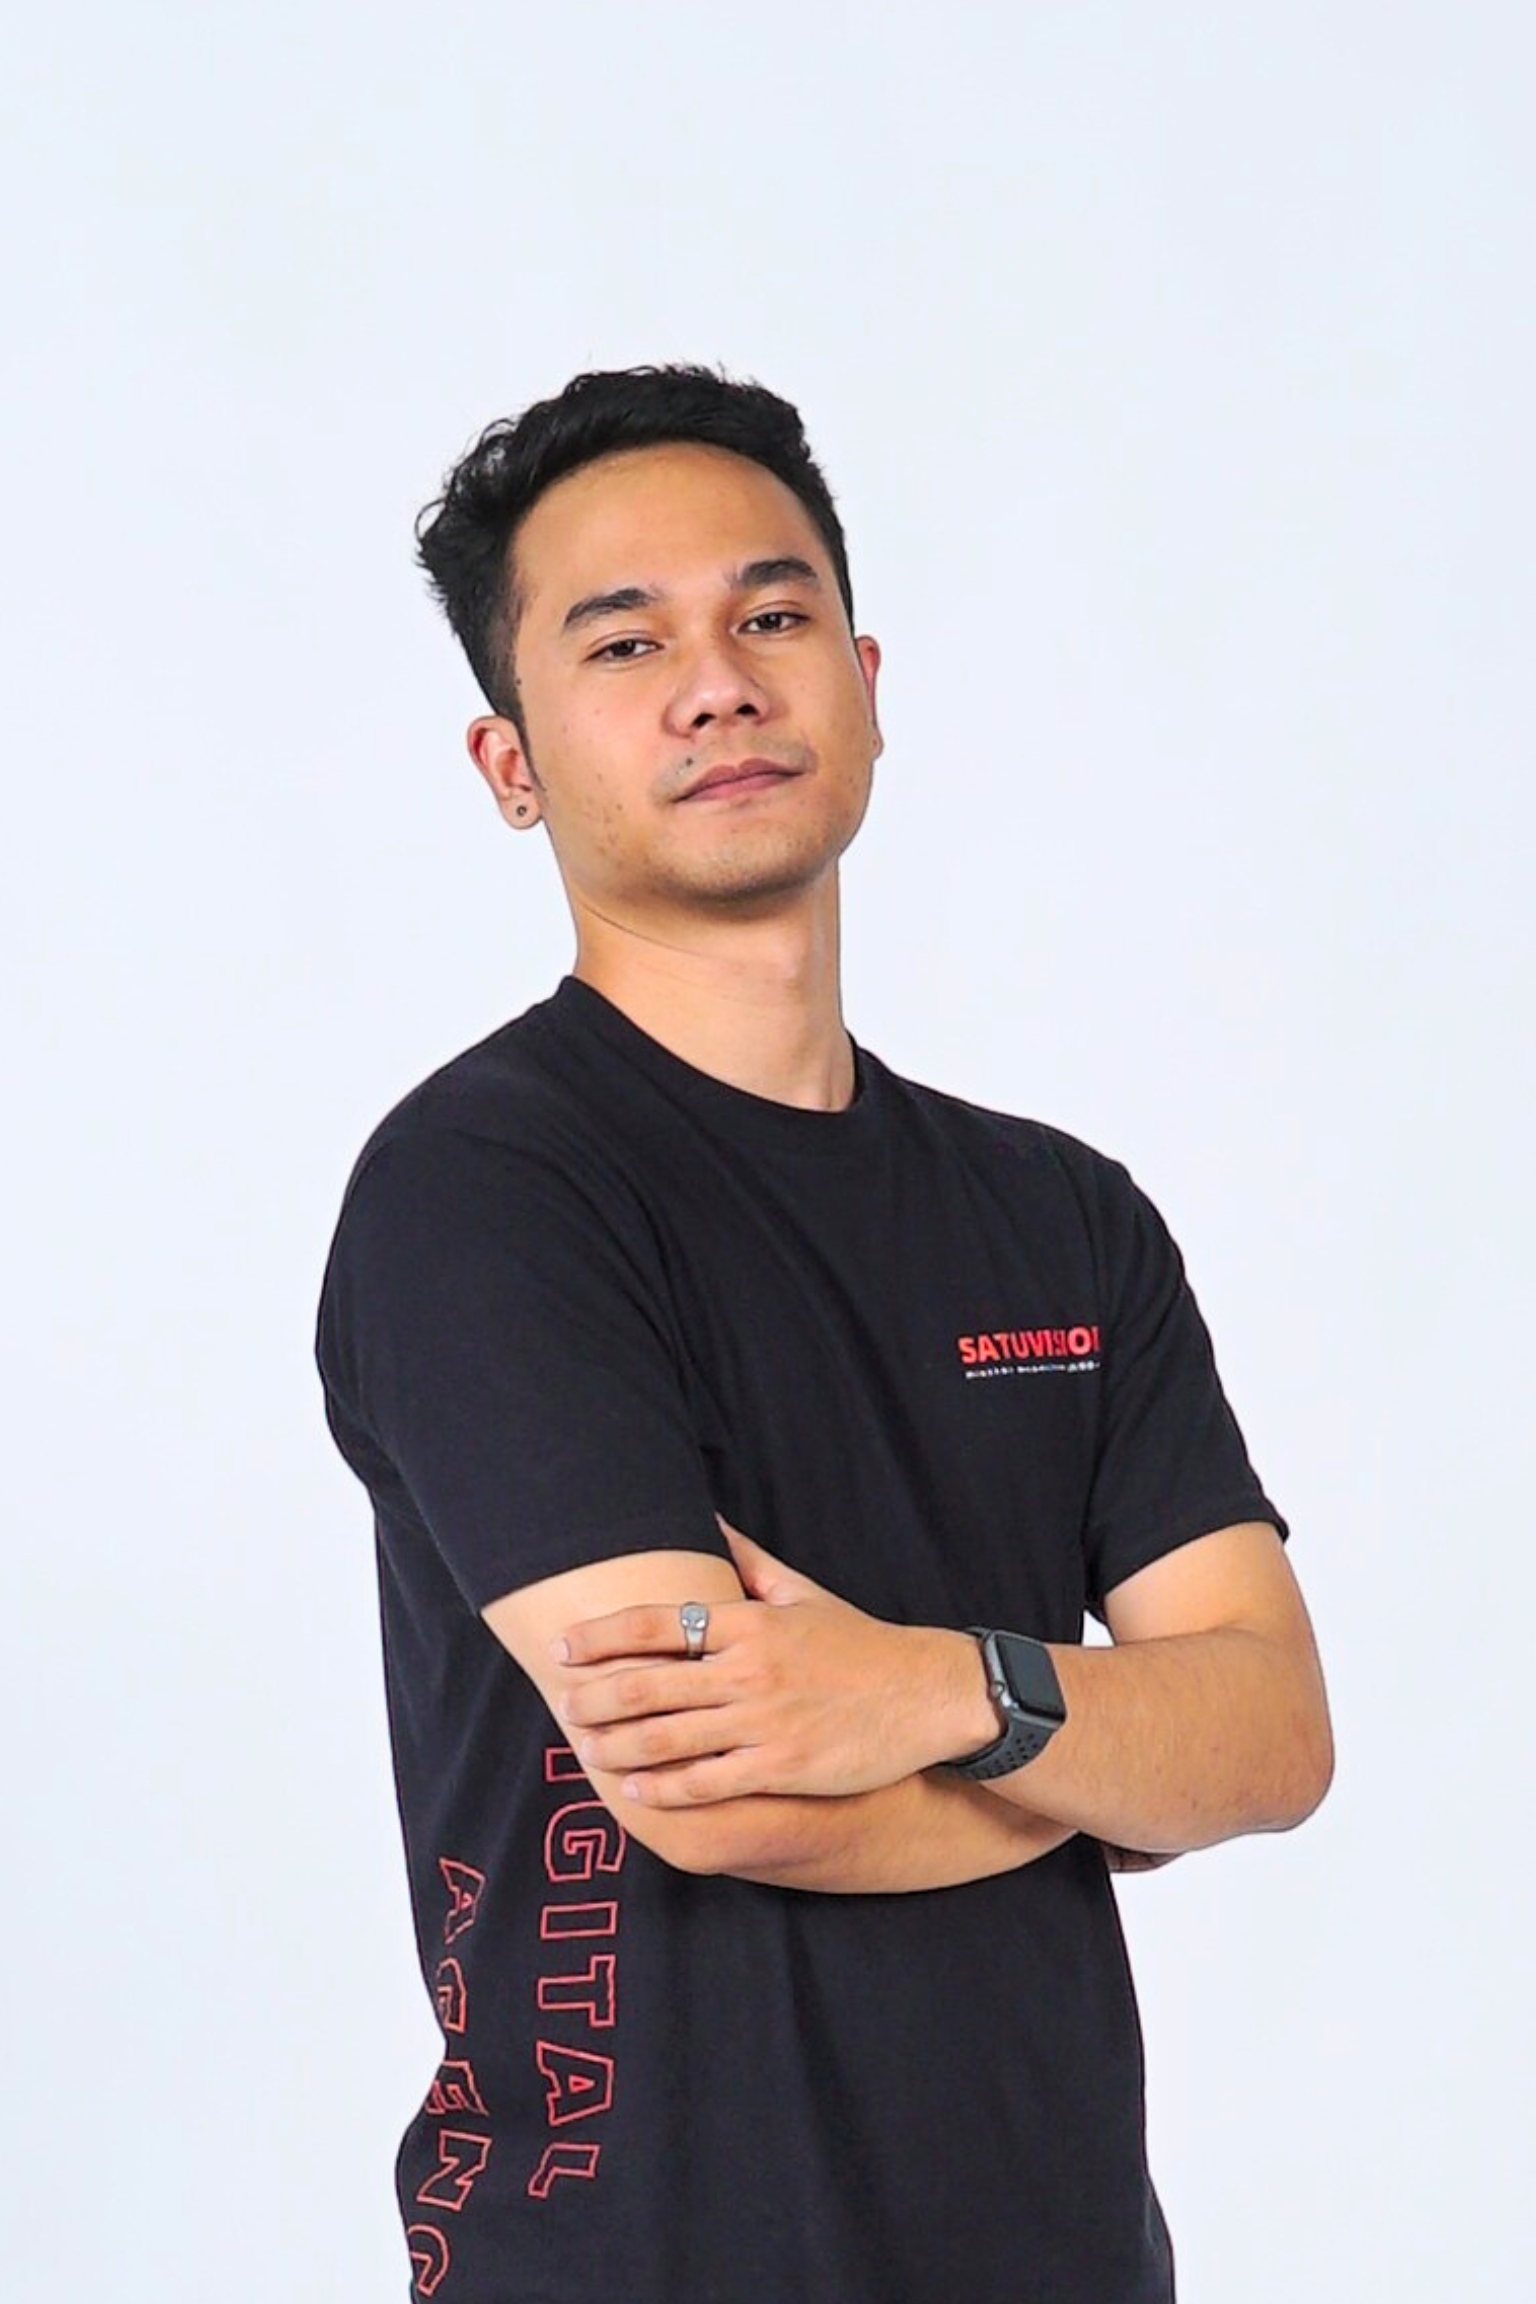 ANDY KRISNA - GENERAL MANAGER in SATUVISION DIGITAL MARKETING AGENCY